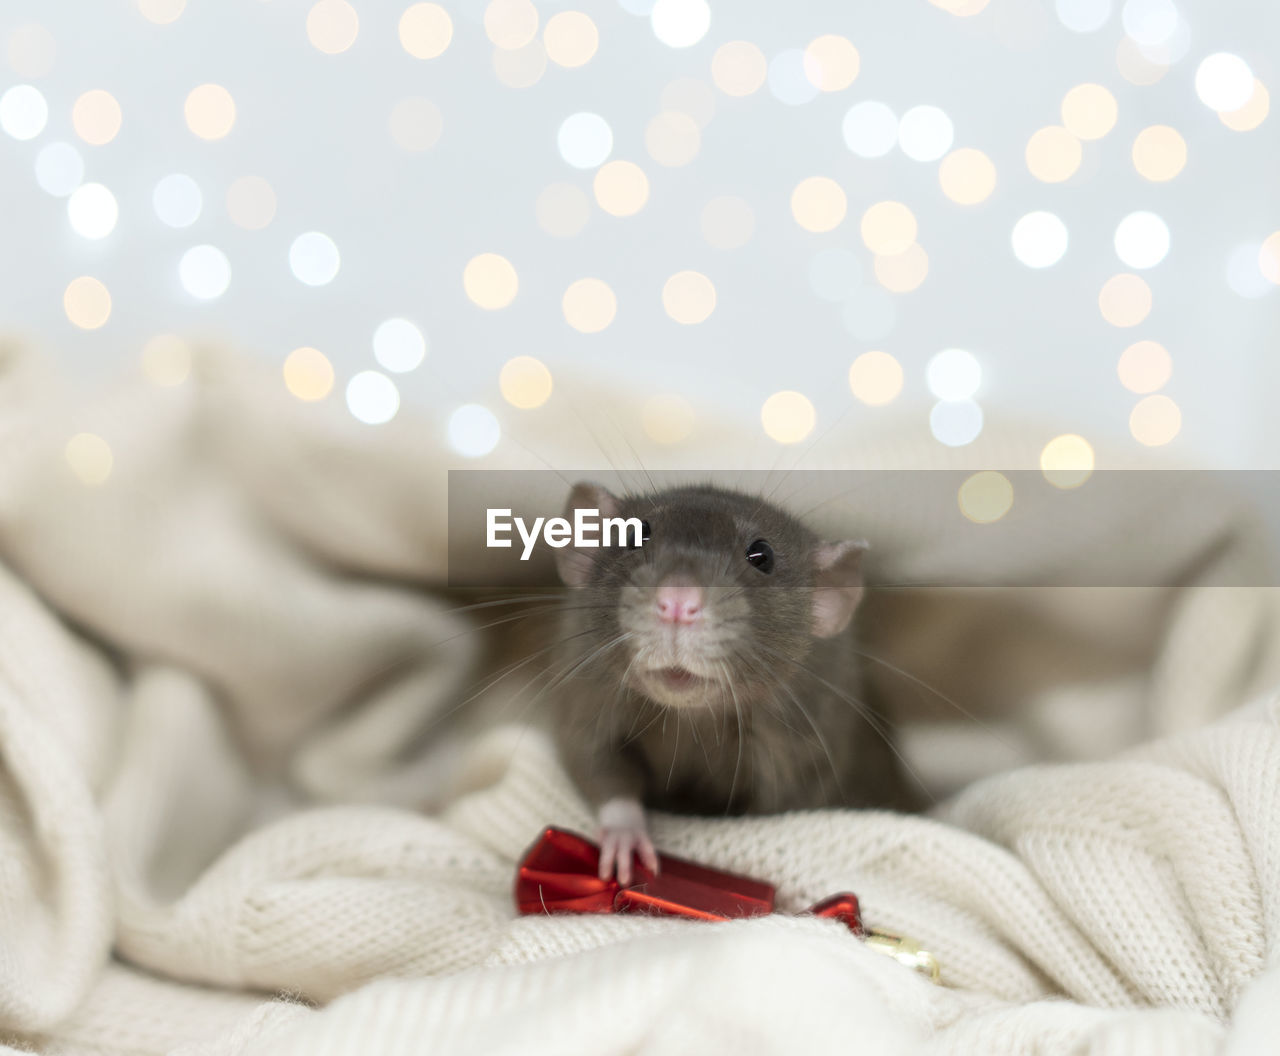 A rat on a blanket with a red toy. blue decorative rat on the background of christmas lights